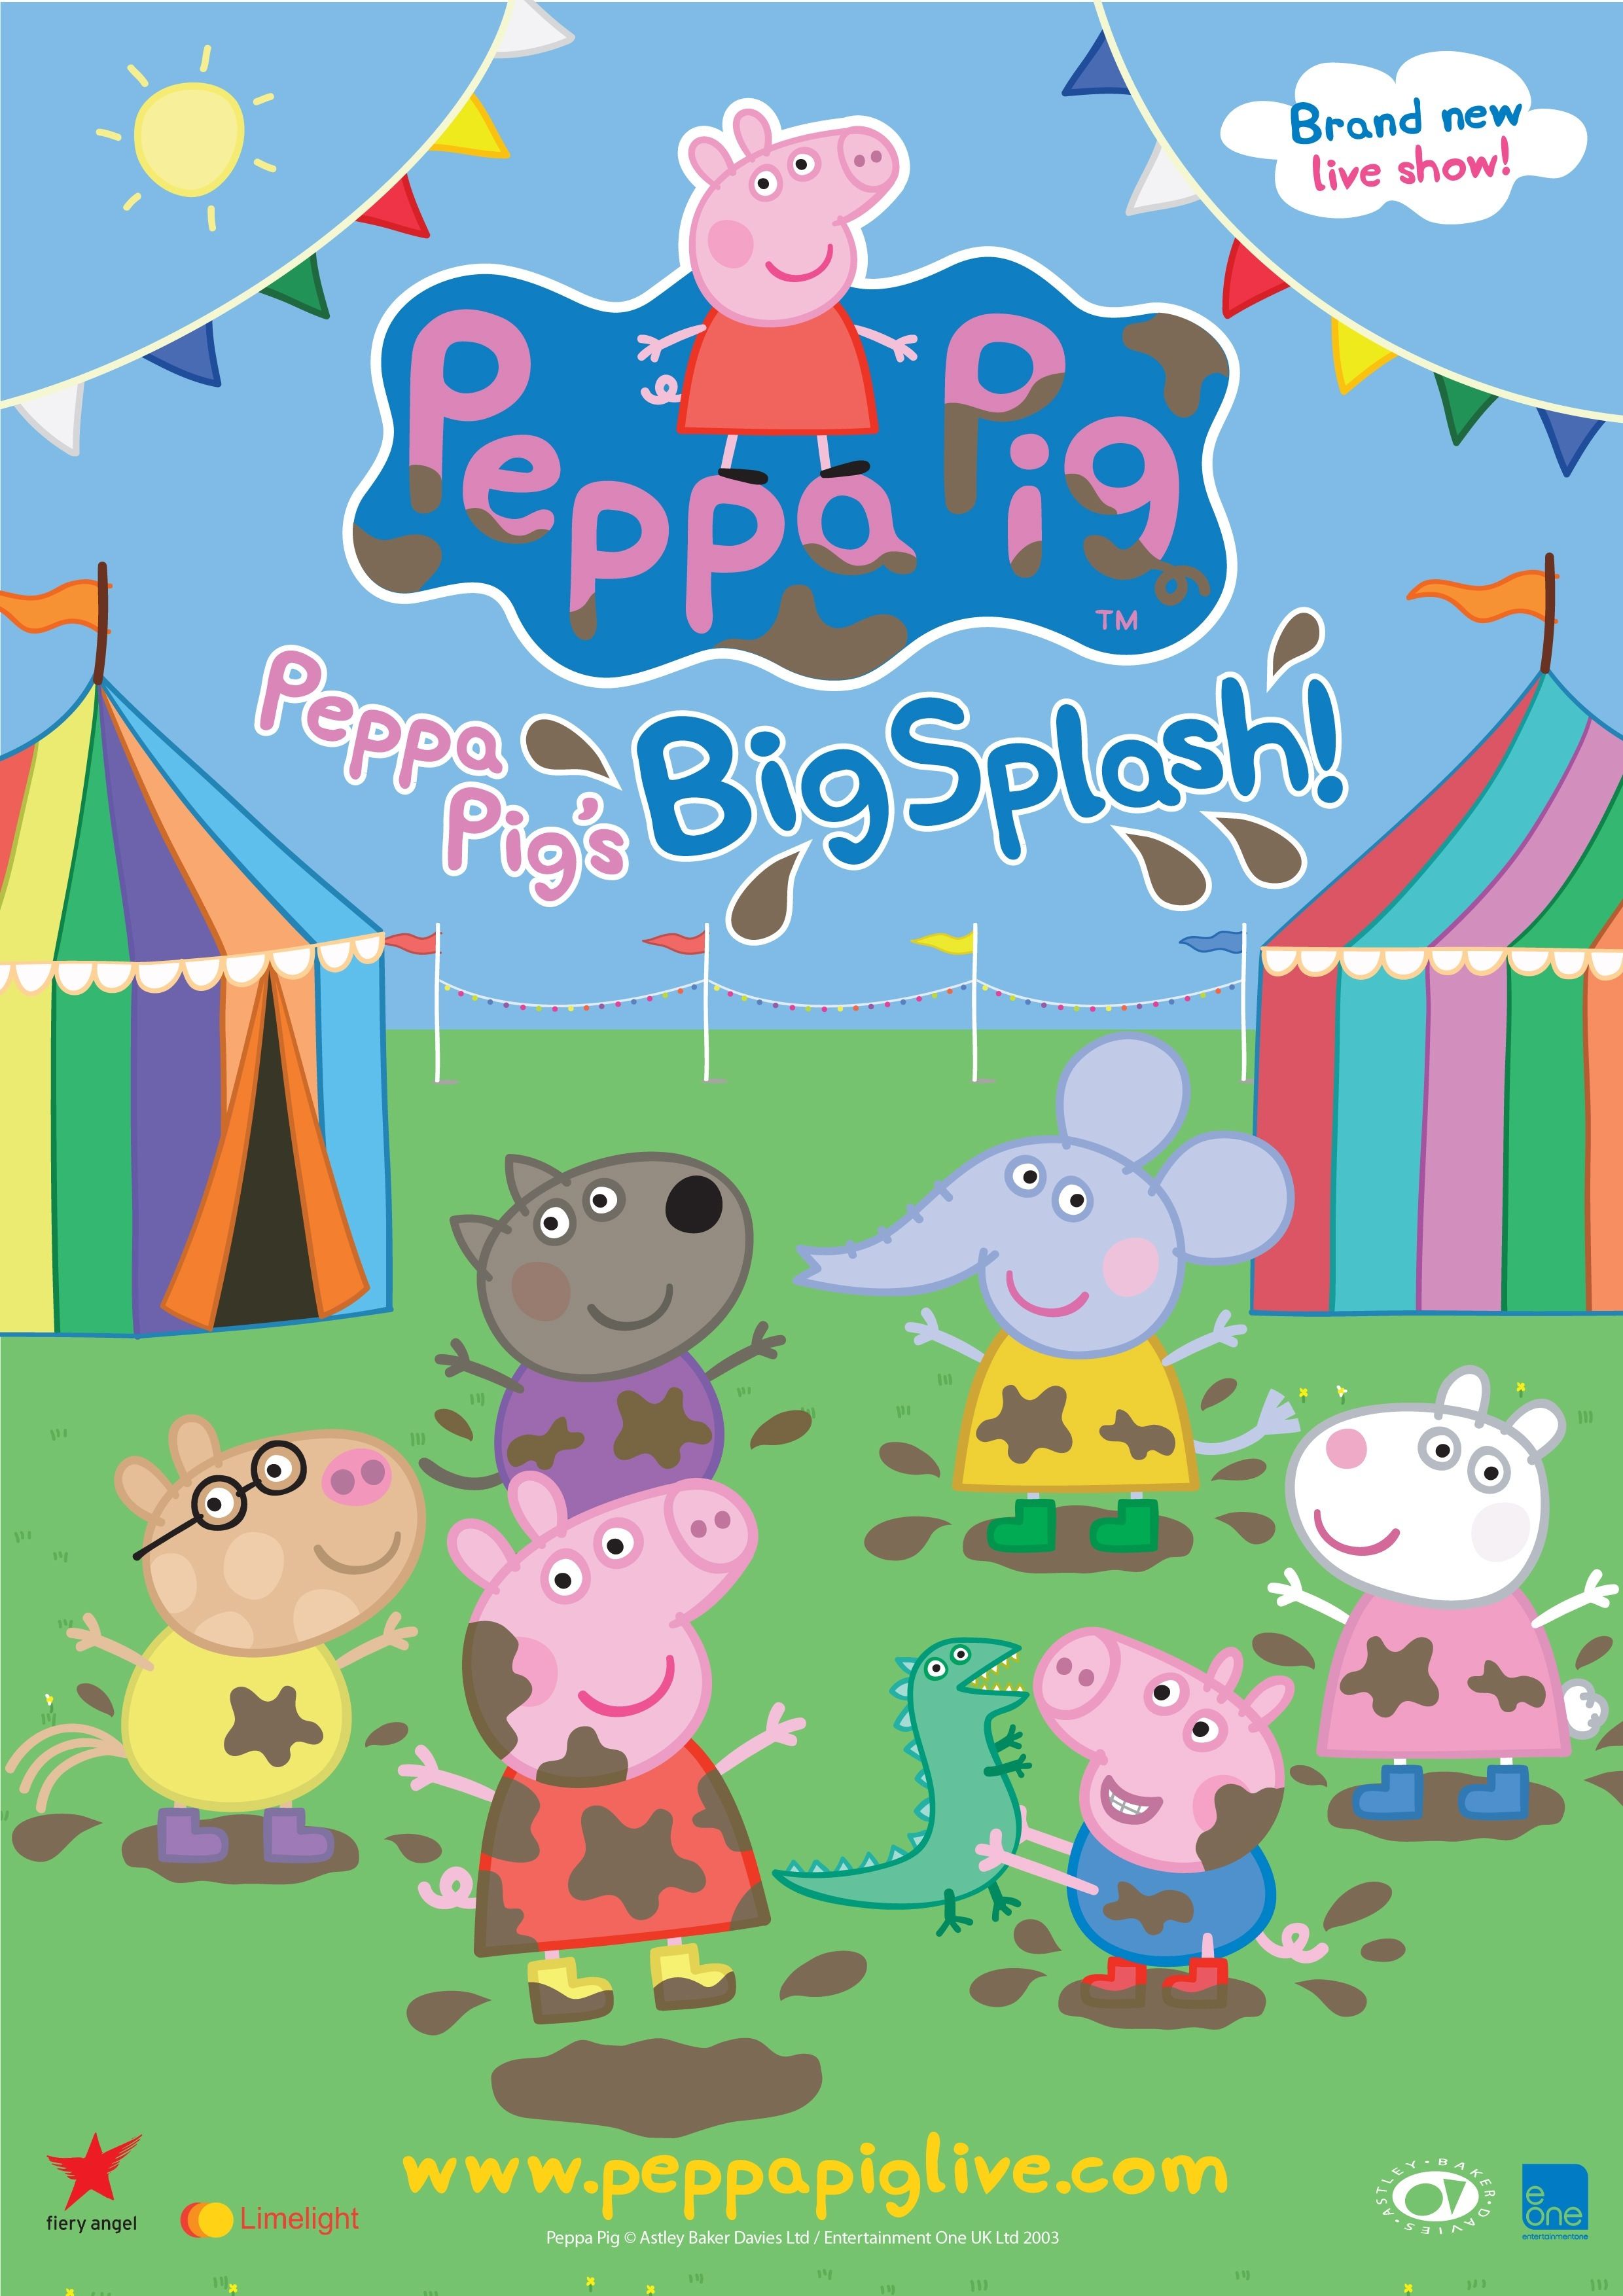 Win a family ticket to see Peppa Pig LIVE -